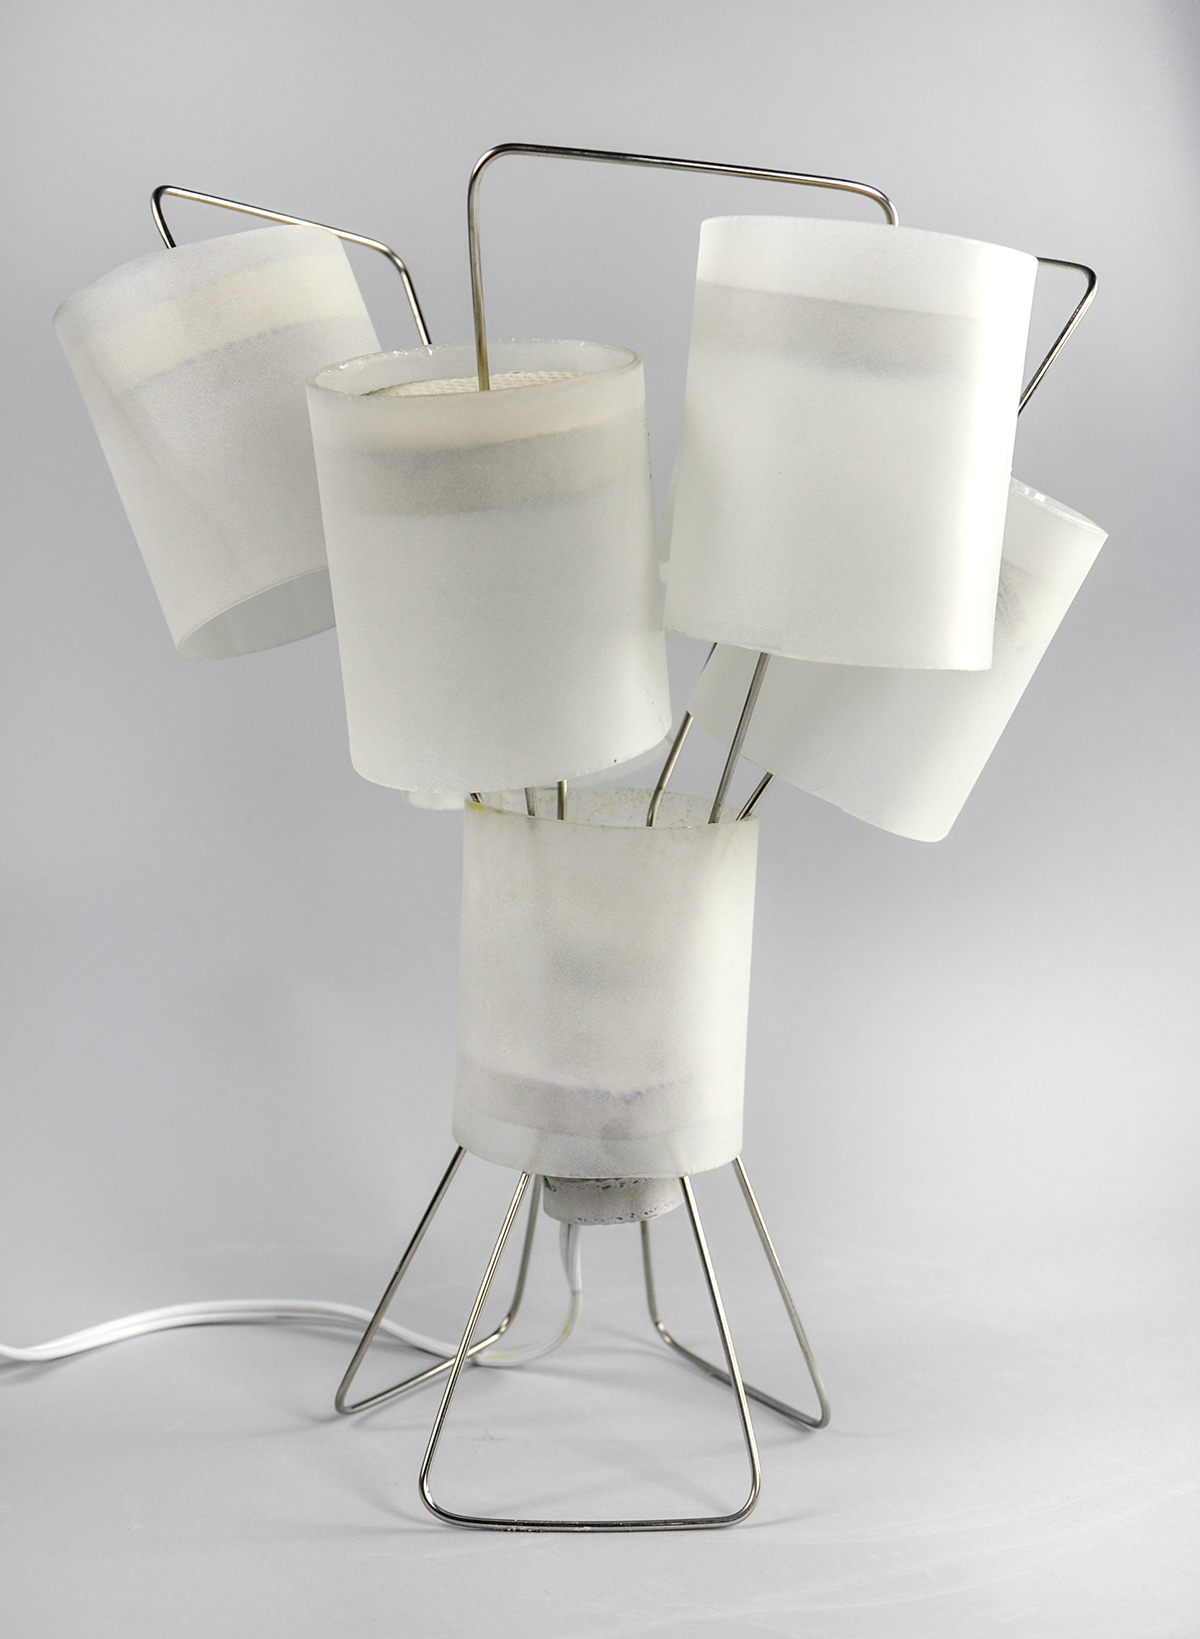 Lamp design principles glass RECYCLED